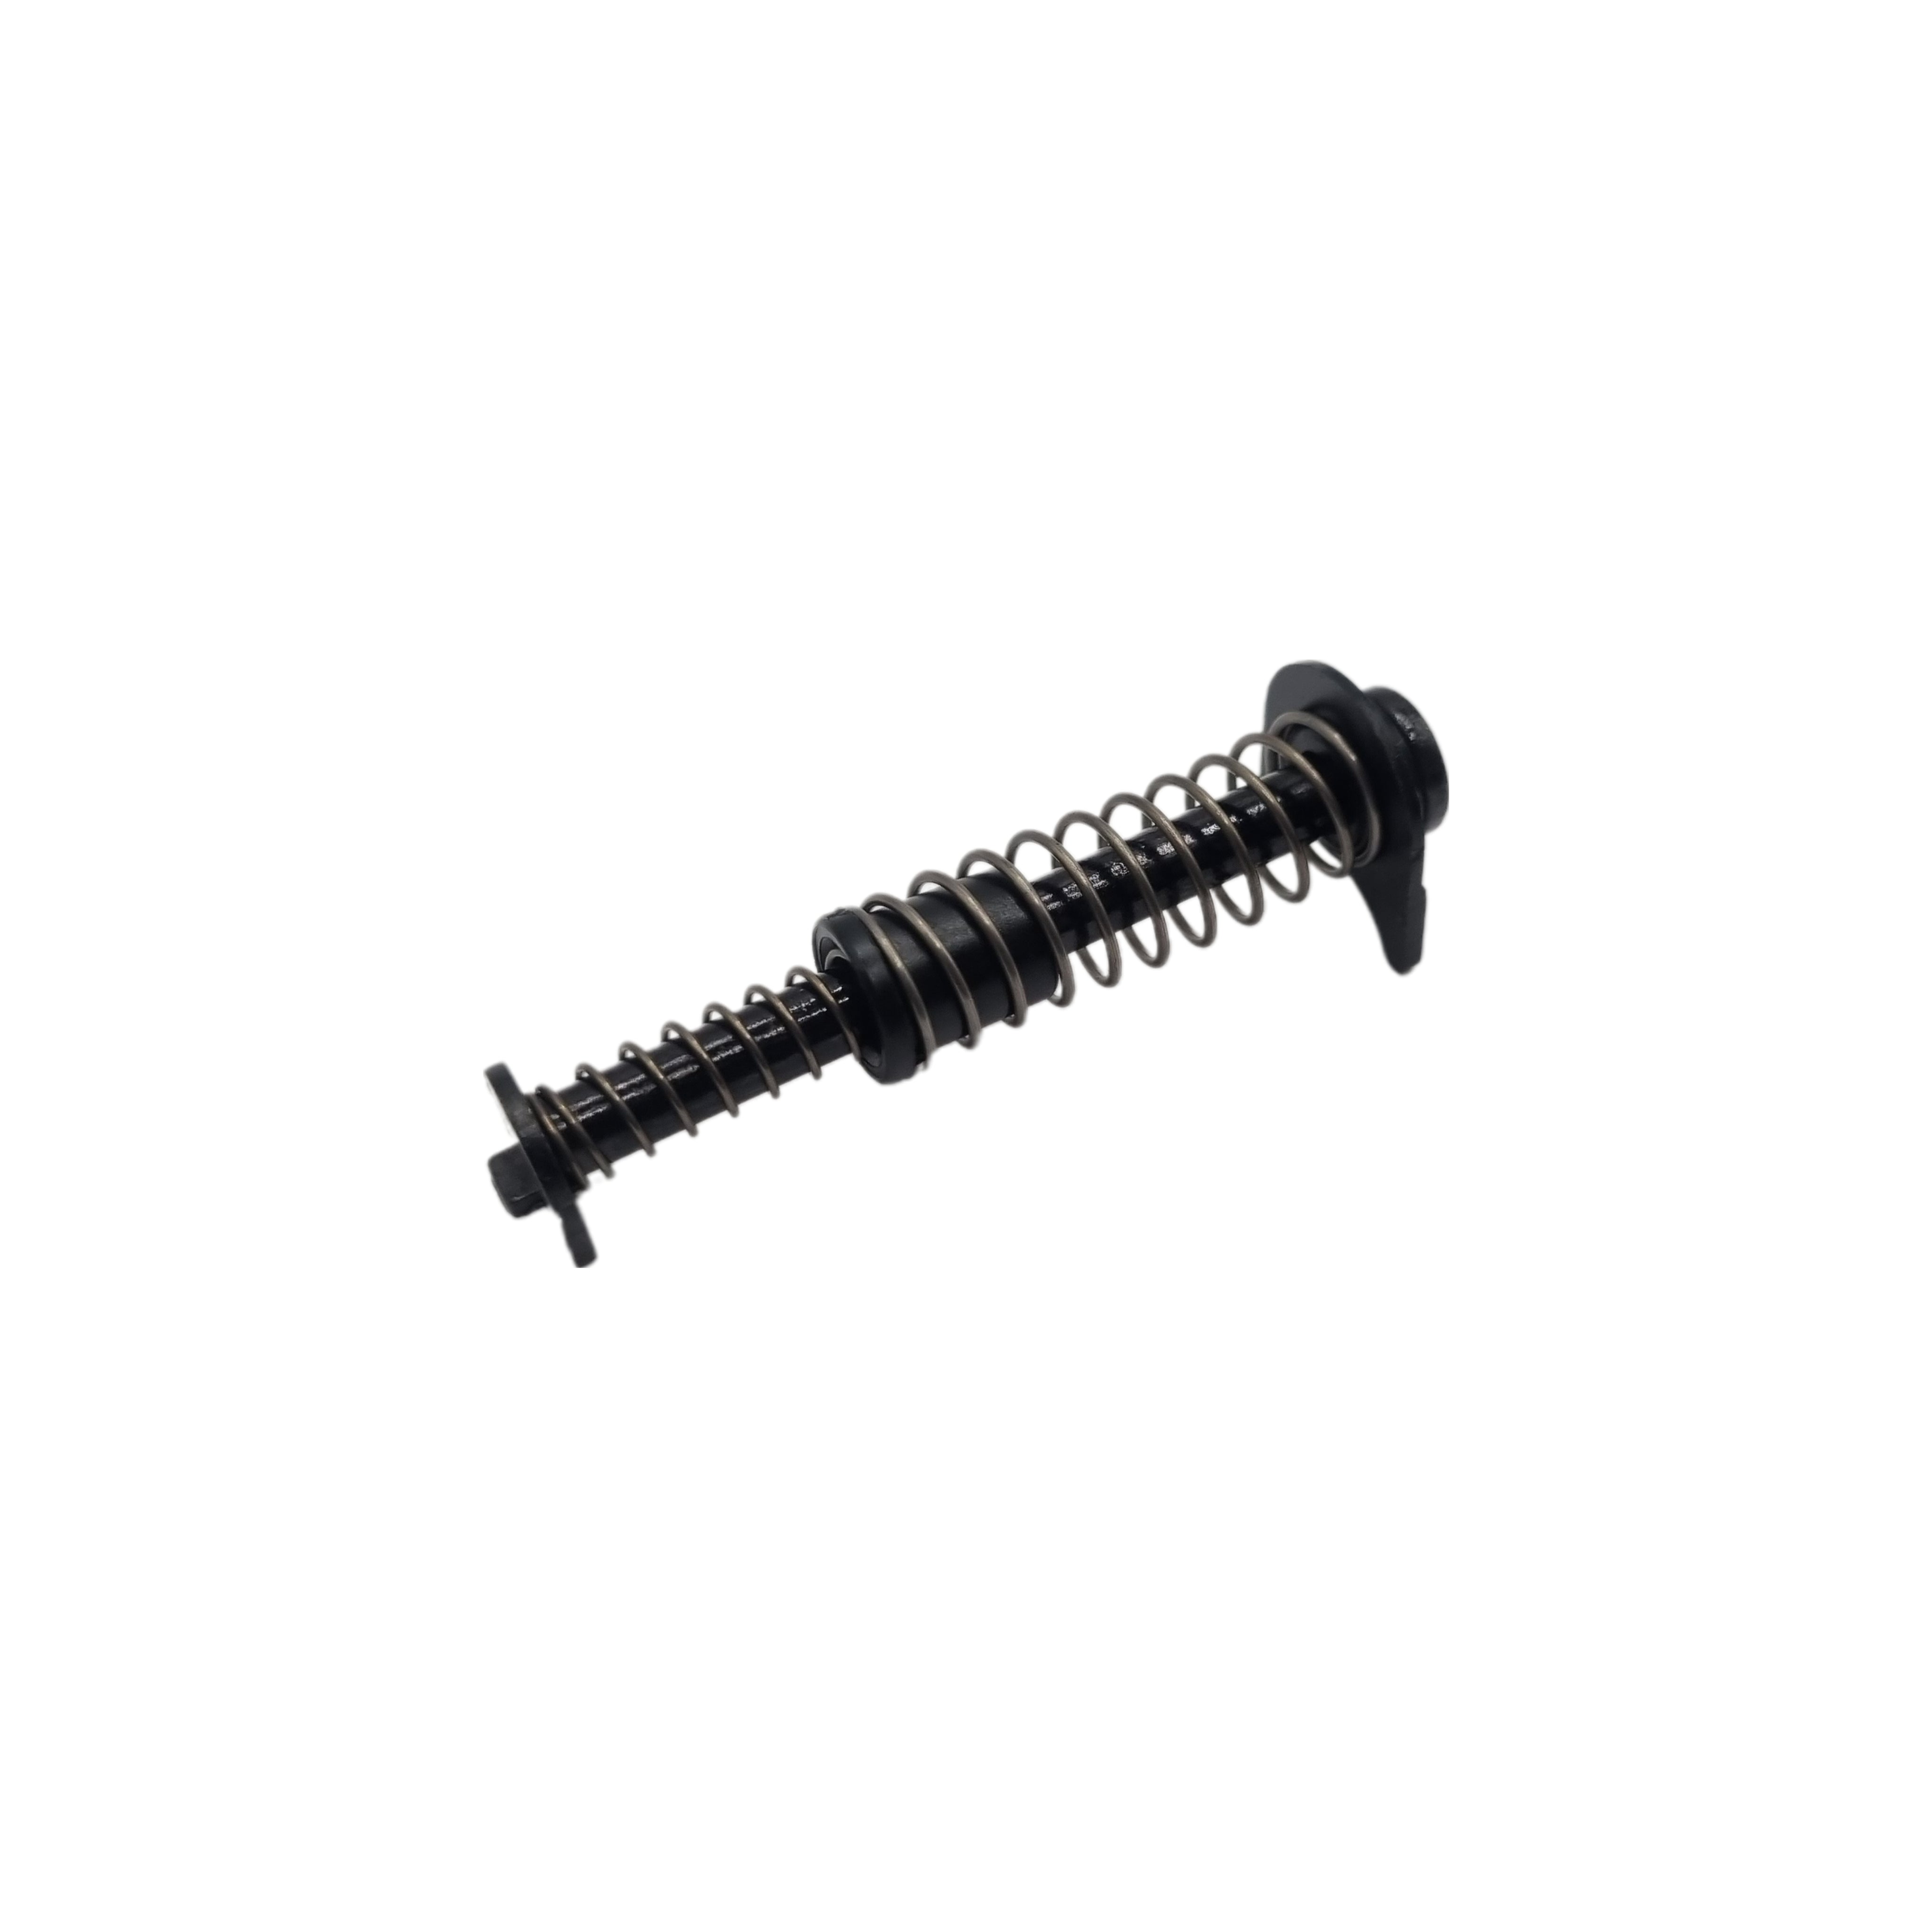 WE G26 G27 replacement part 31, 32, 33 - Recoil Rod